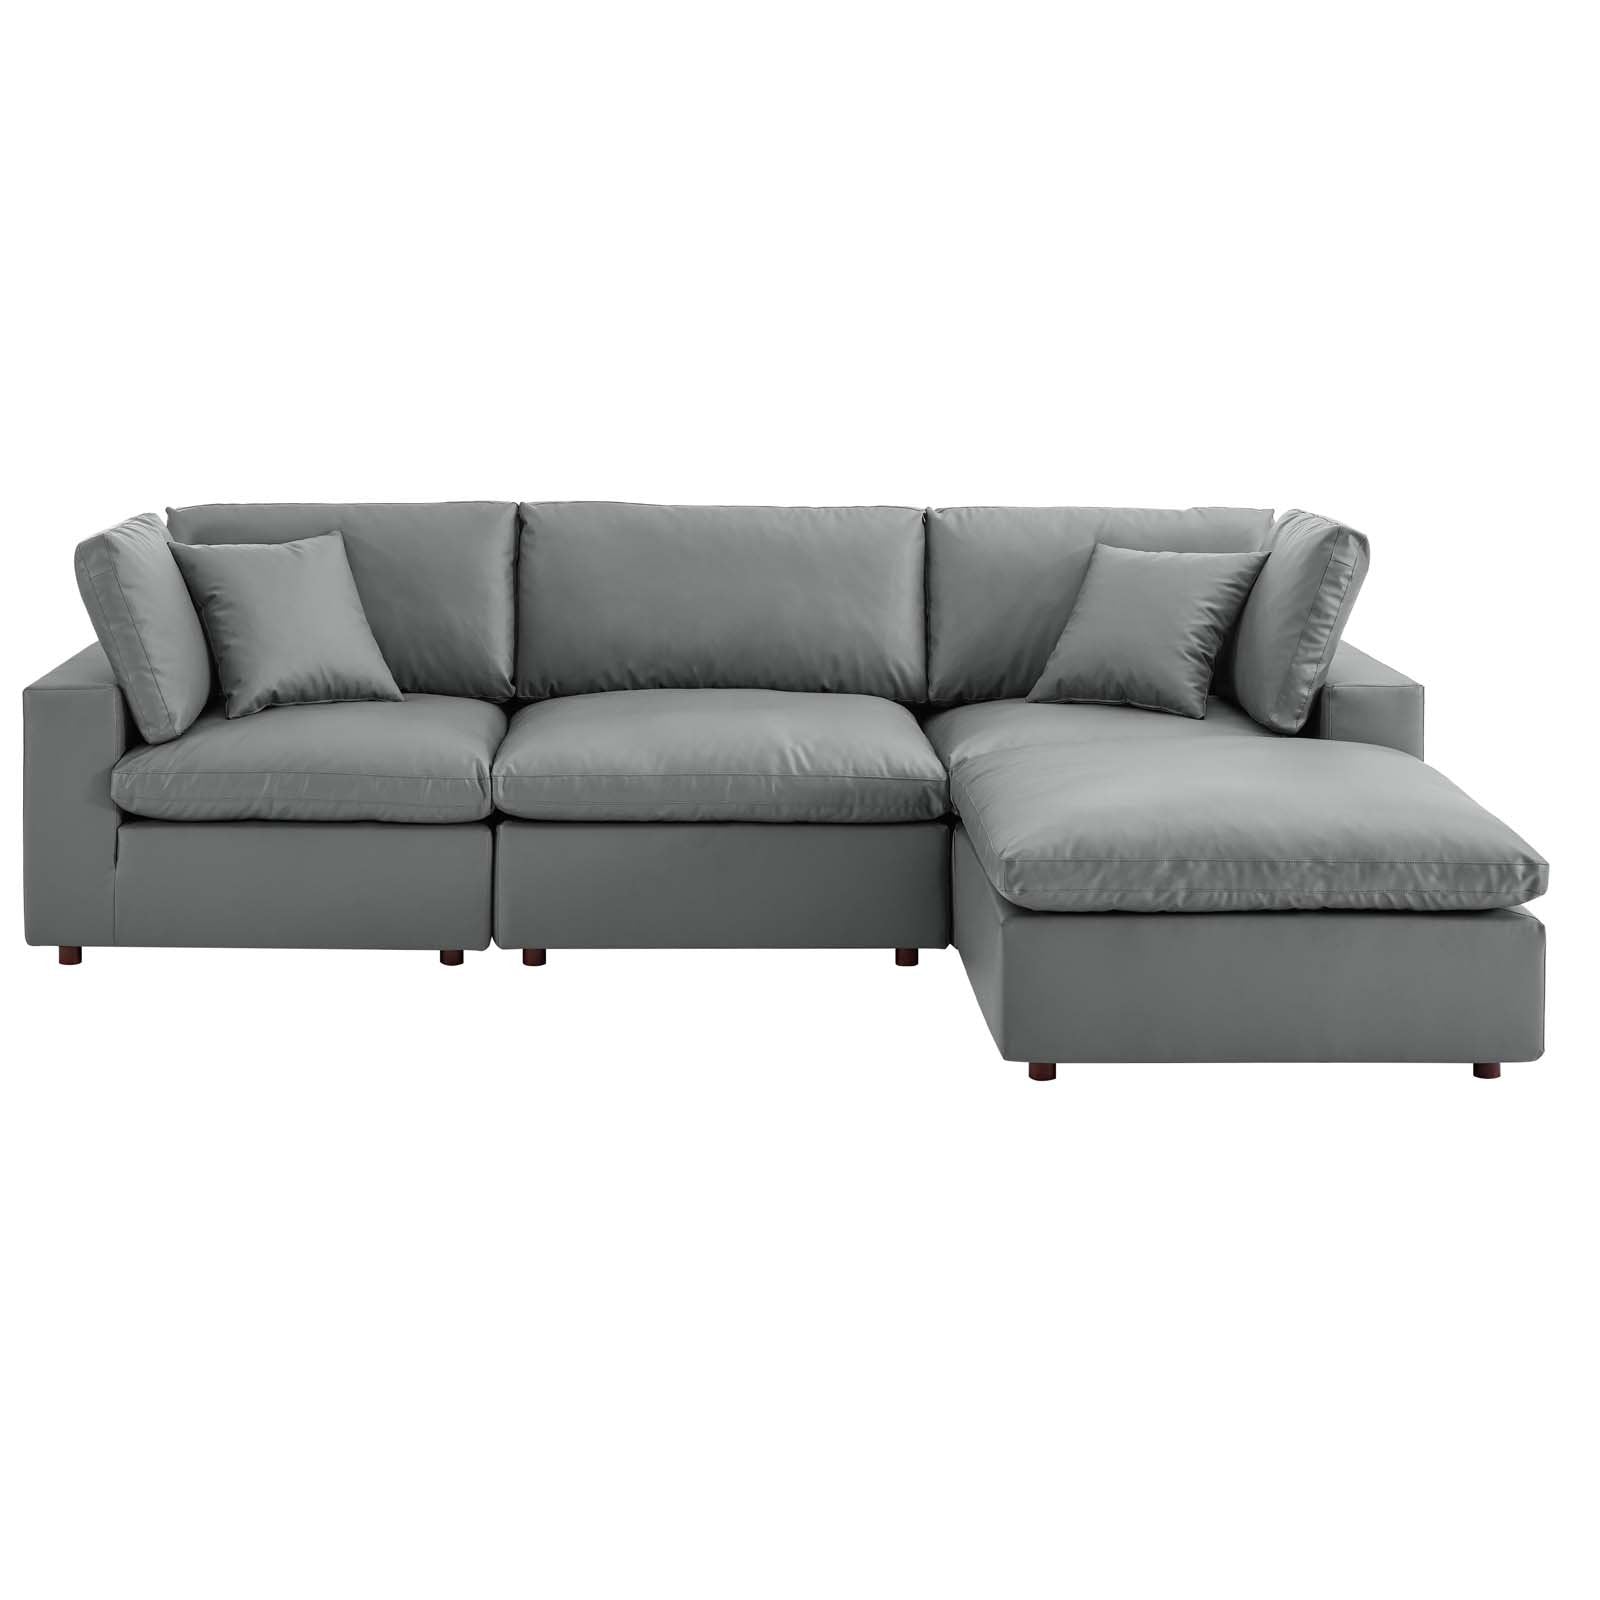 Commix Down Filled Overstuffed Vegan Leather 4-Piece Sectional Sofa